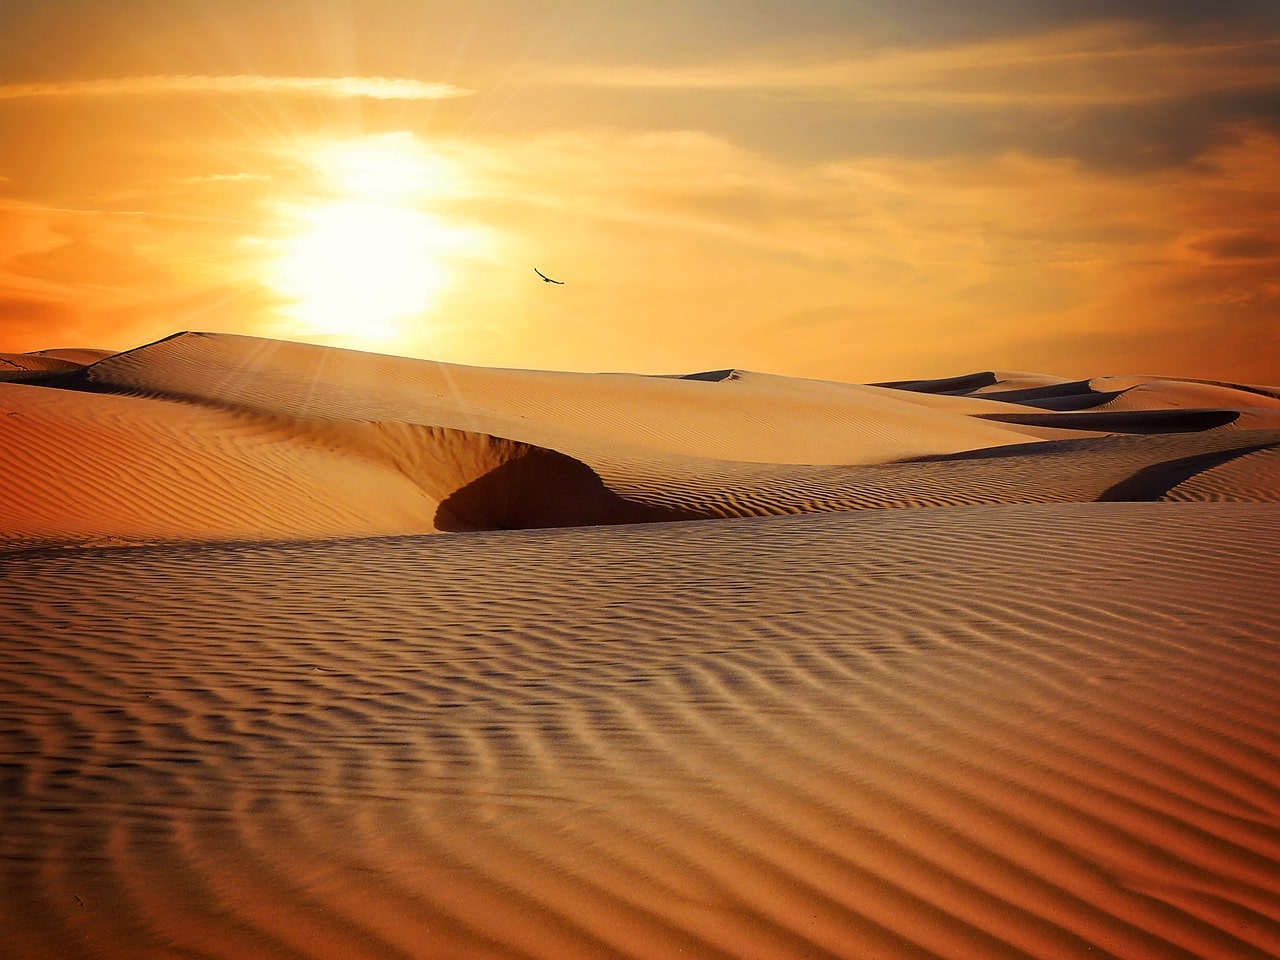 6 Tips for Photographing Sand Dunes